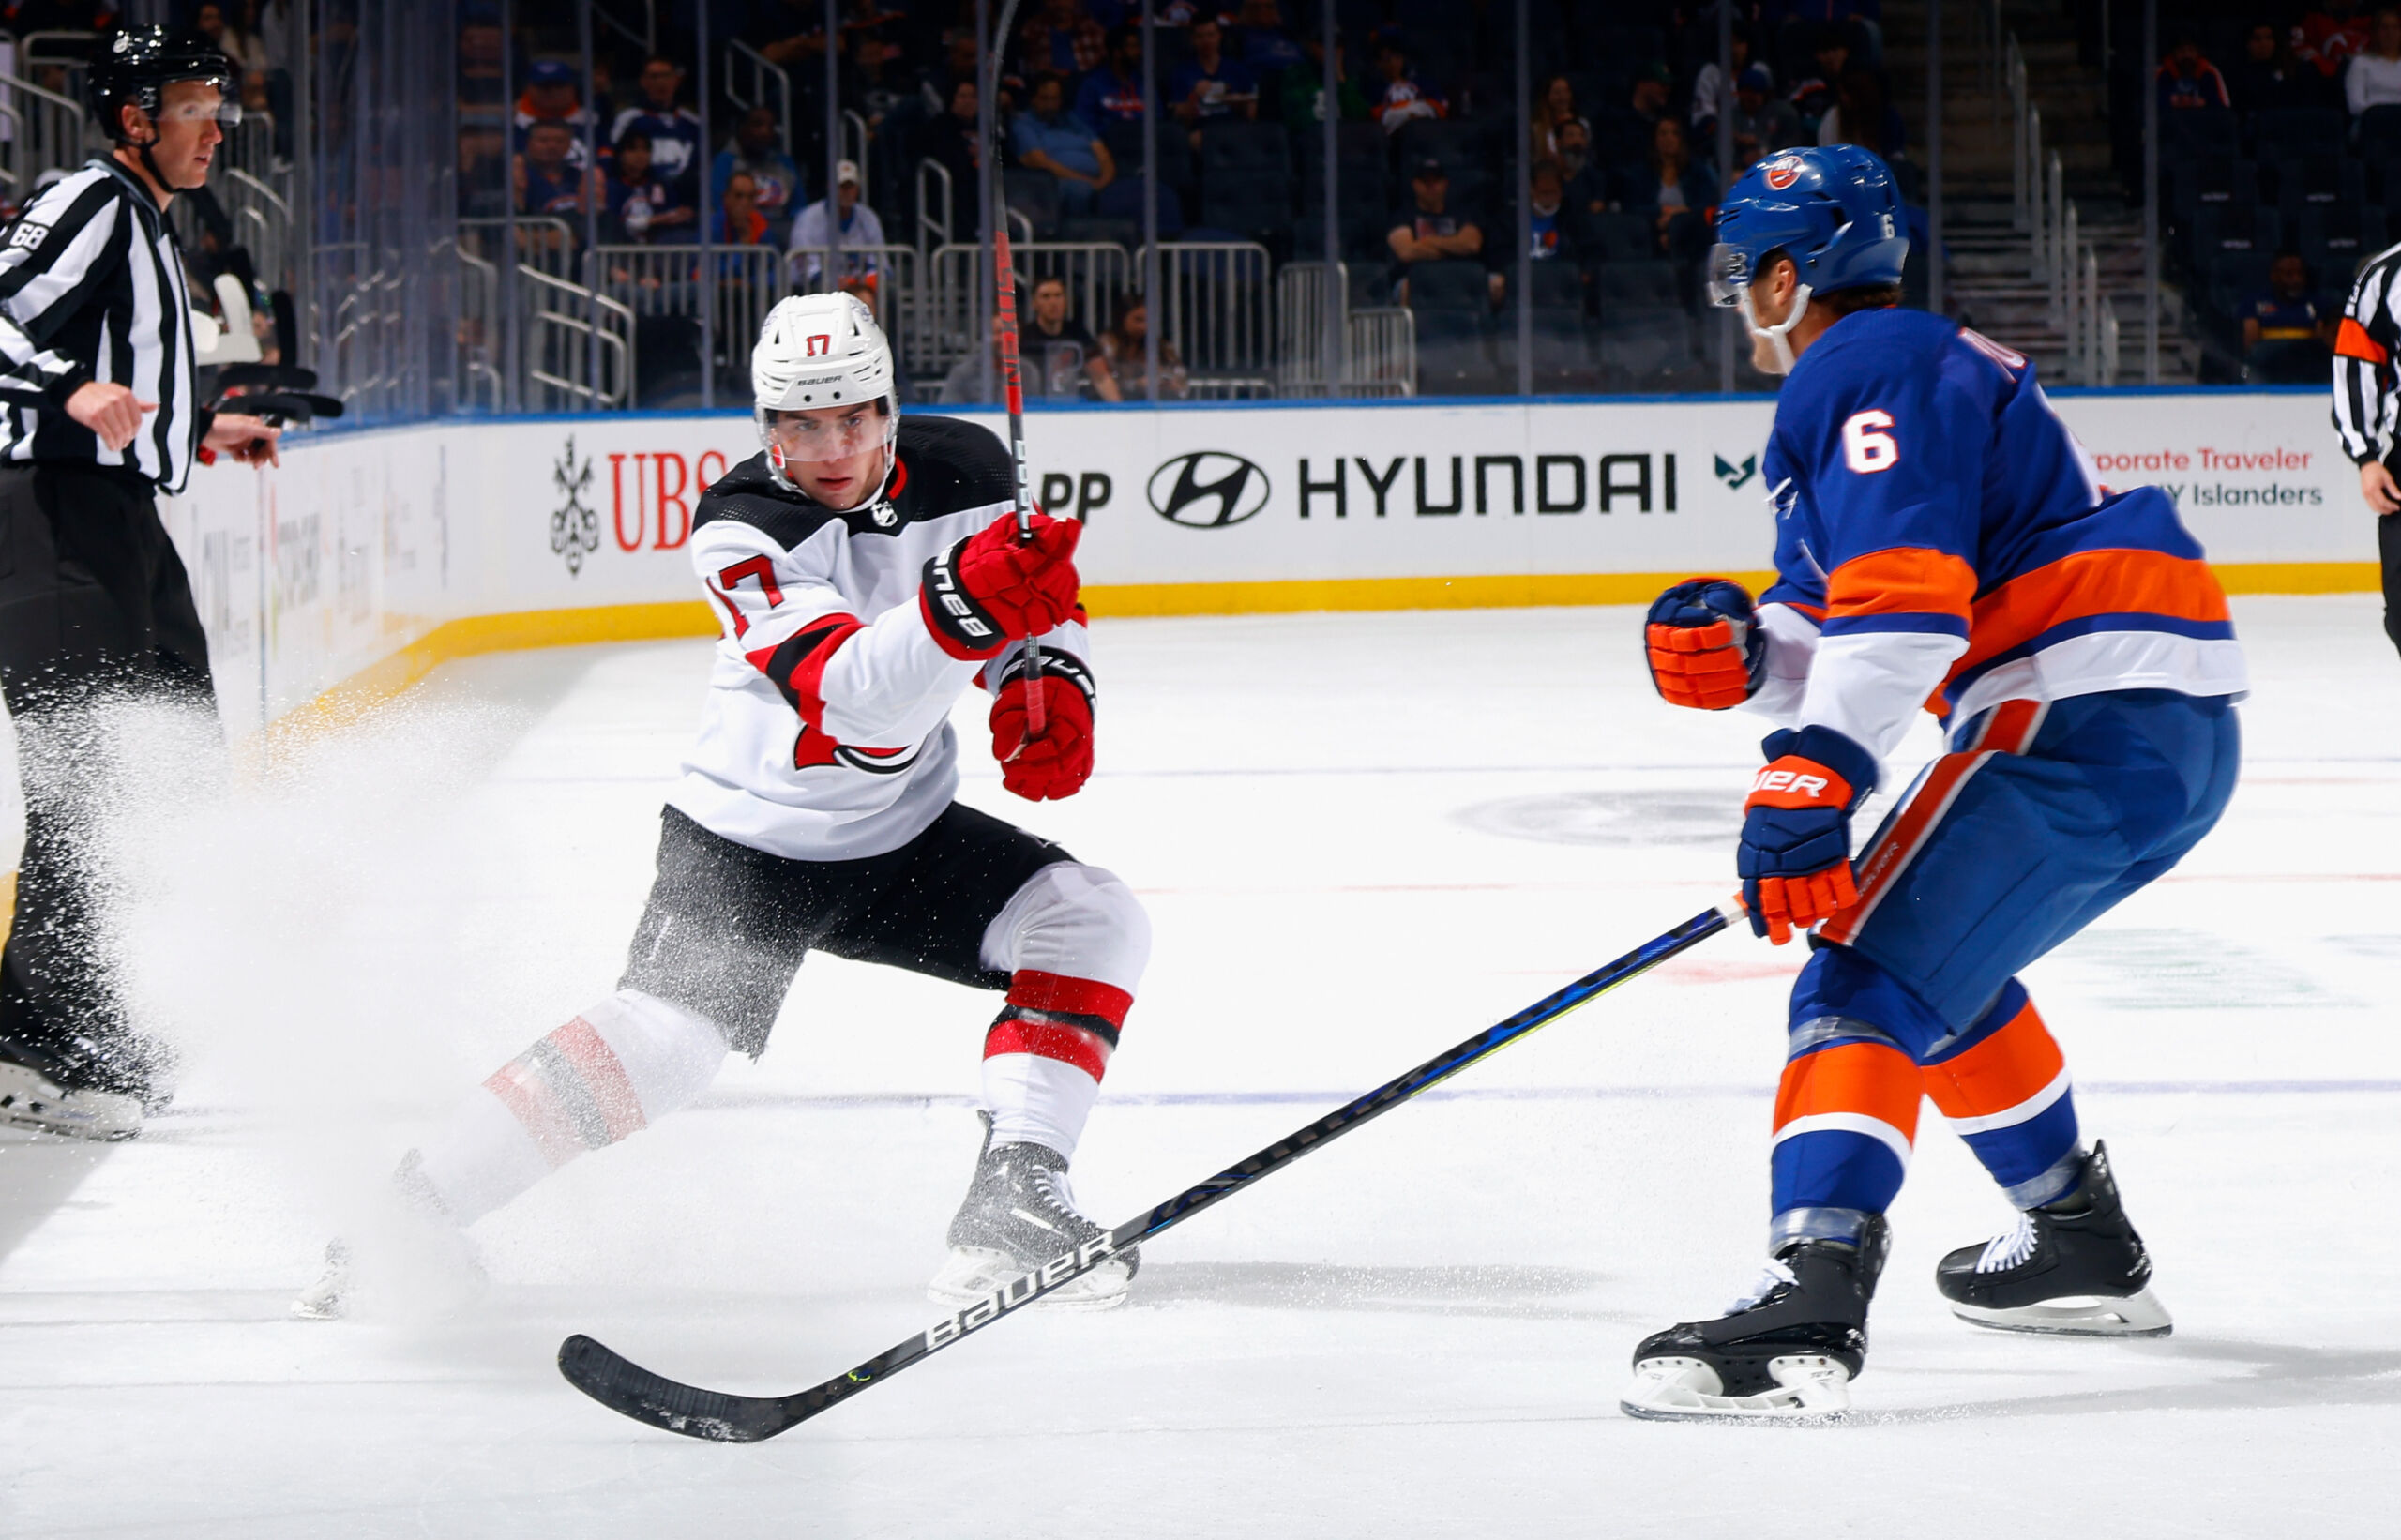 Devils vs Maple Leafs Odds, Picks and Predictions - Toronto Piles It On  Schmid, Devils